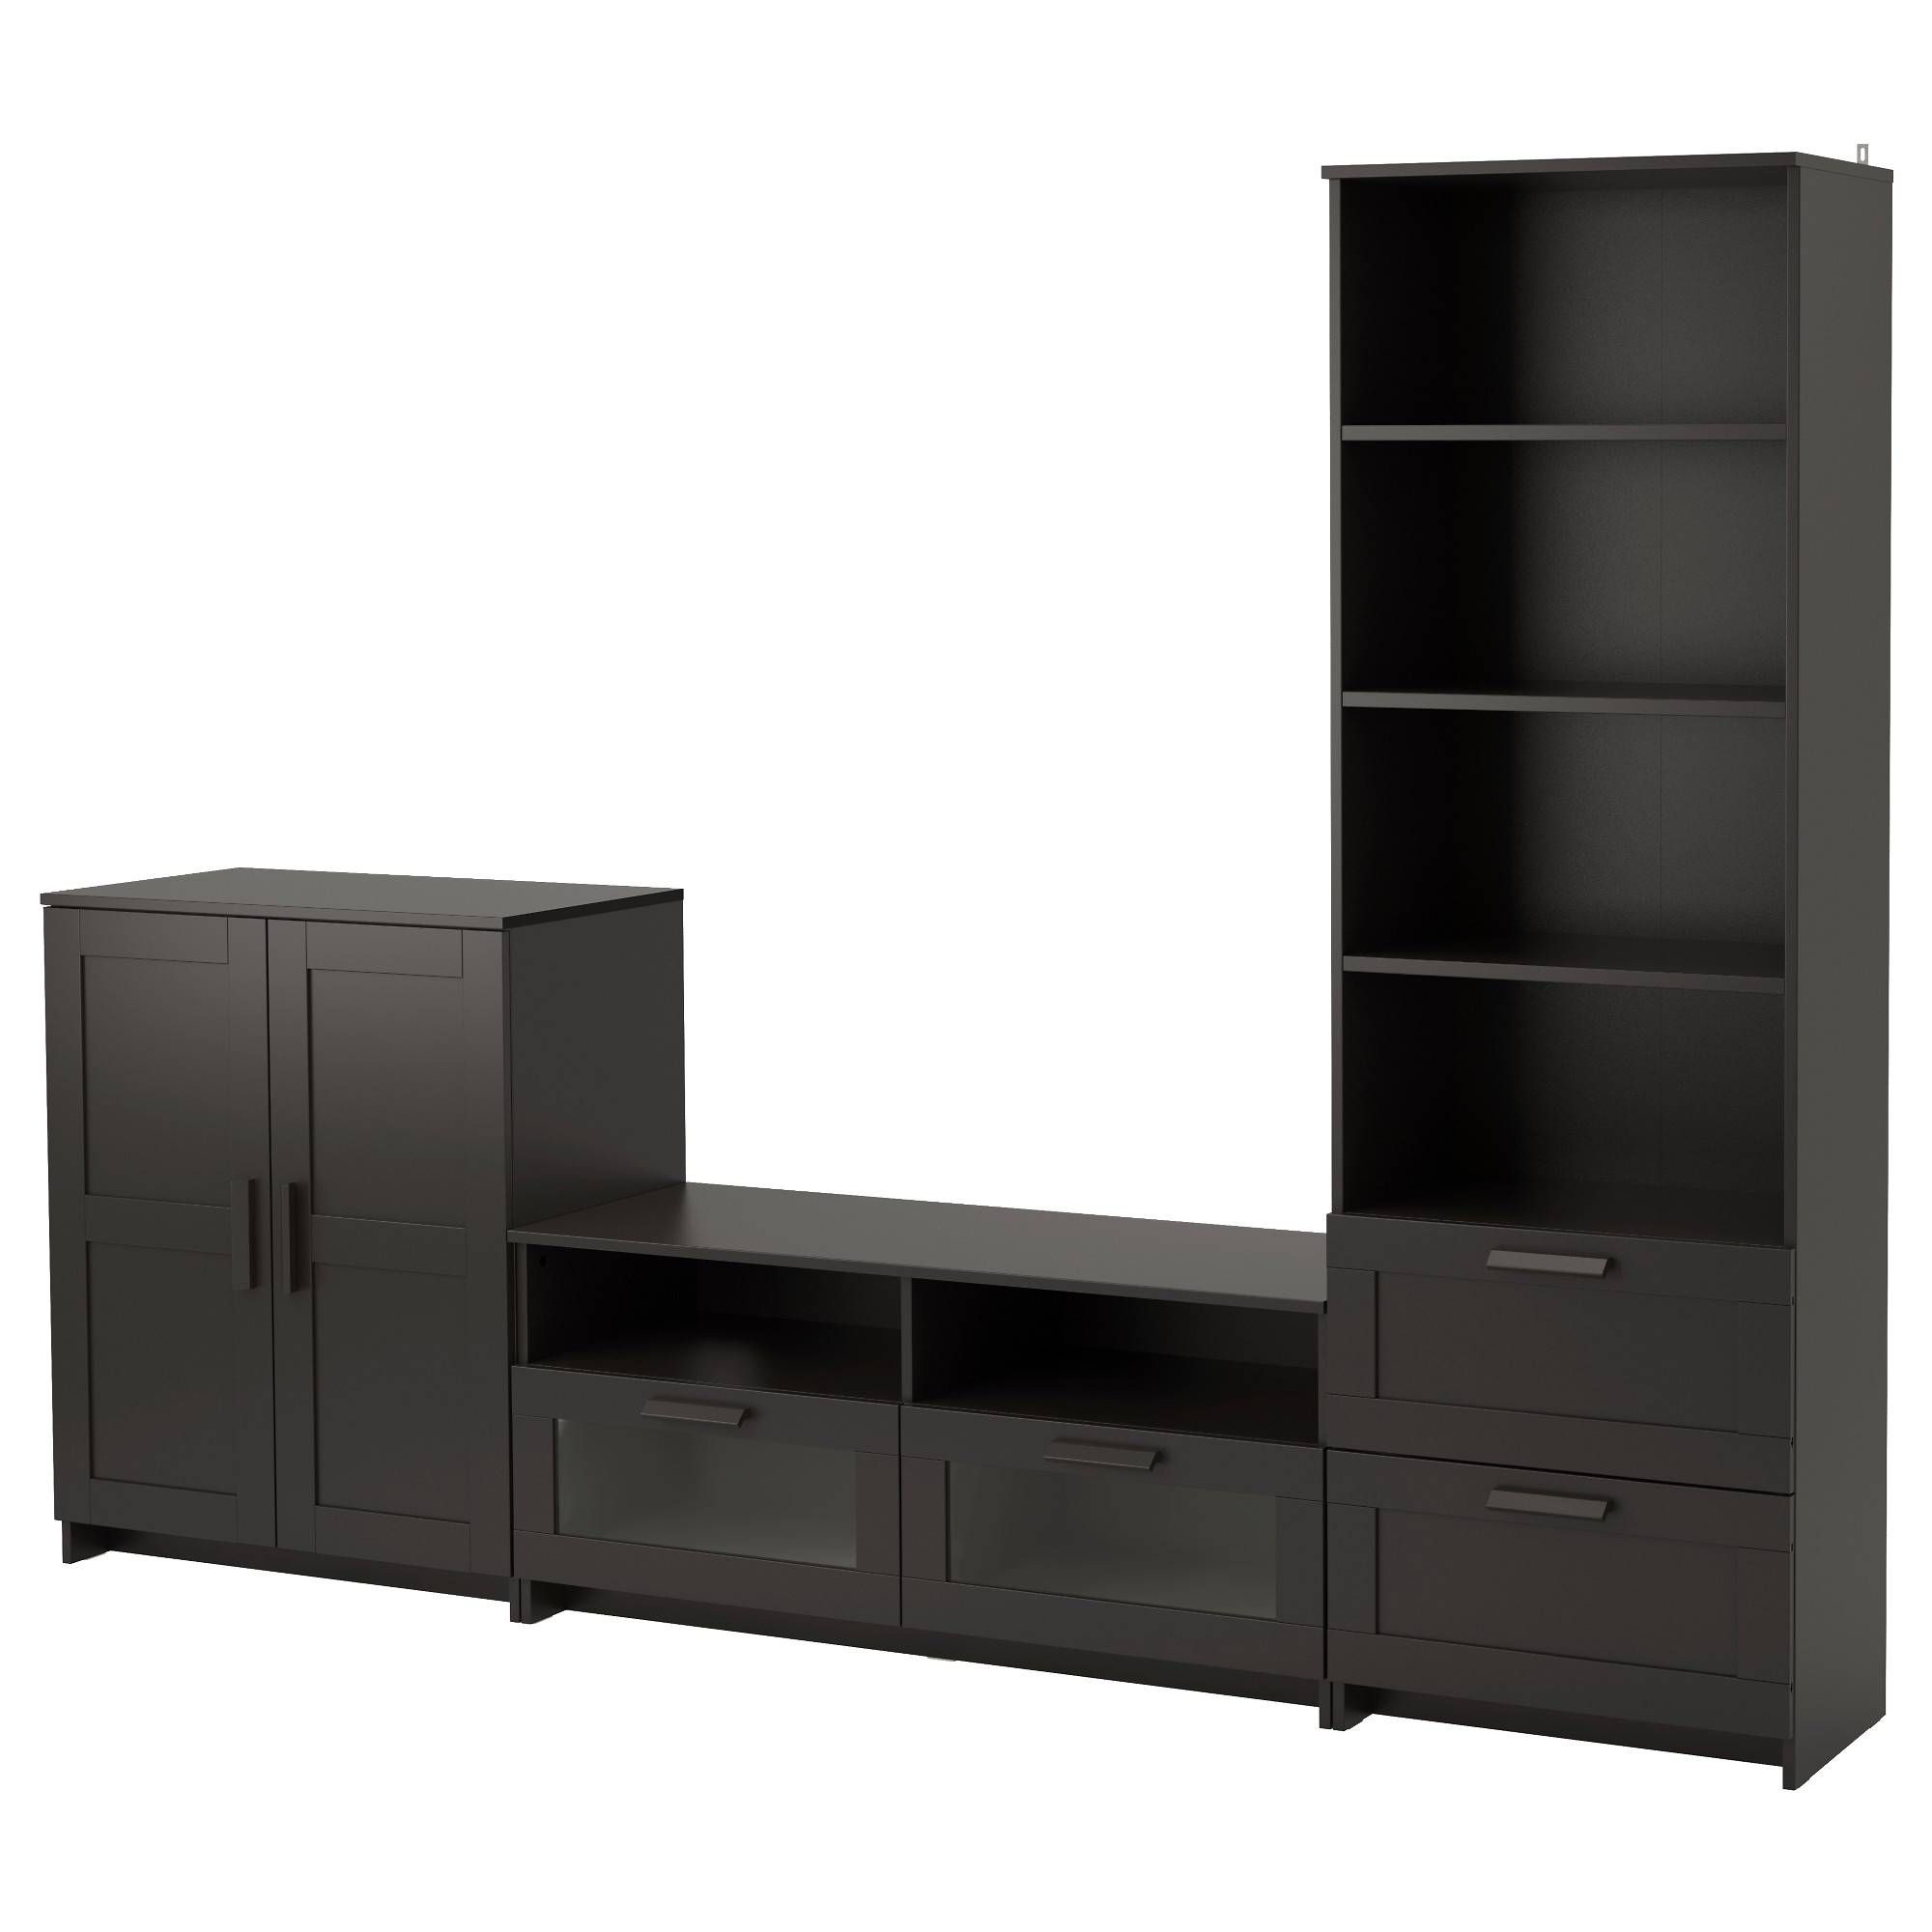 Brimnes Tv Storage Combination Black 260x41x190 Cm – Ikea For Dresser And Tv Stands Combination (View 14 of 15)